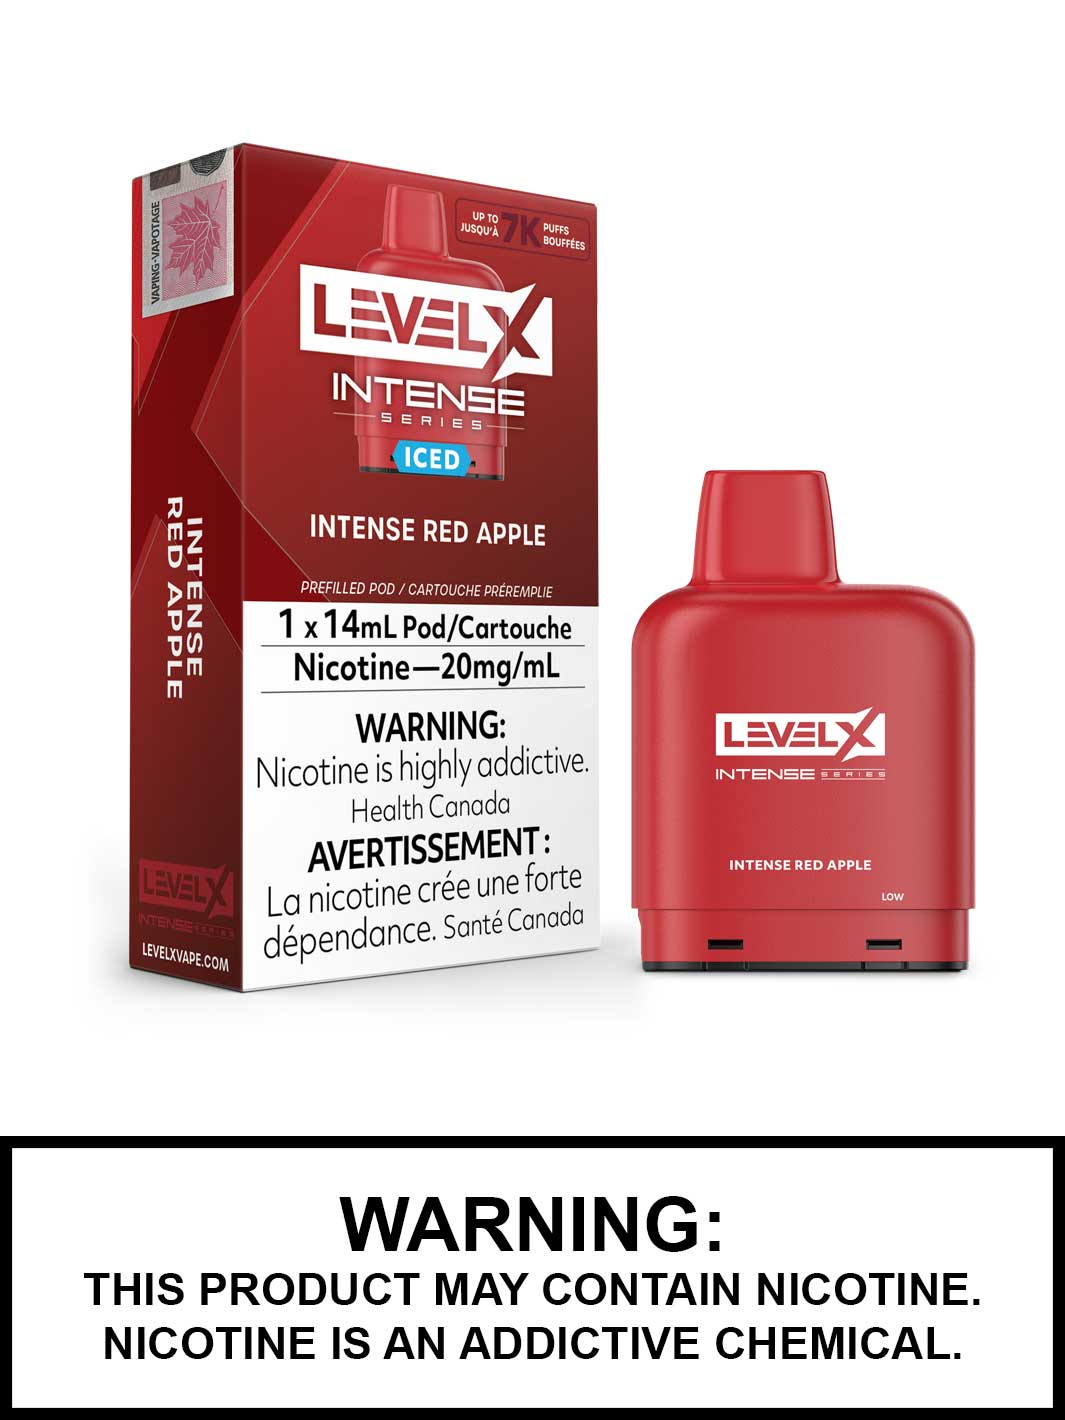 Intense Red Apple Iced Level X Intense Series Pods, Vape360 Canada